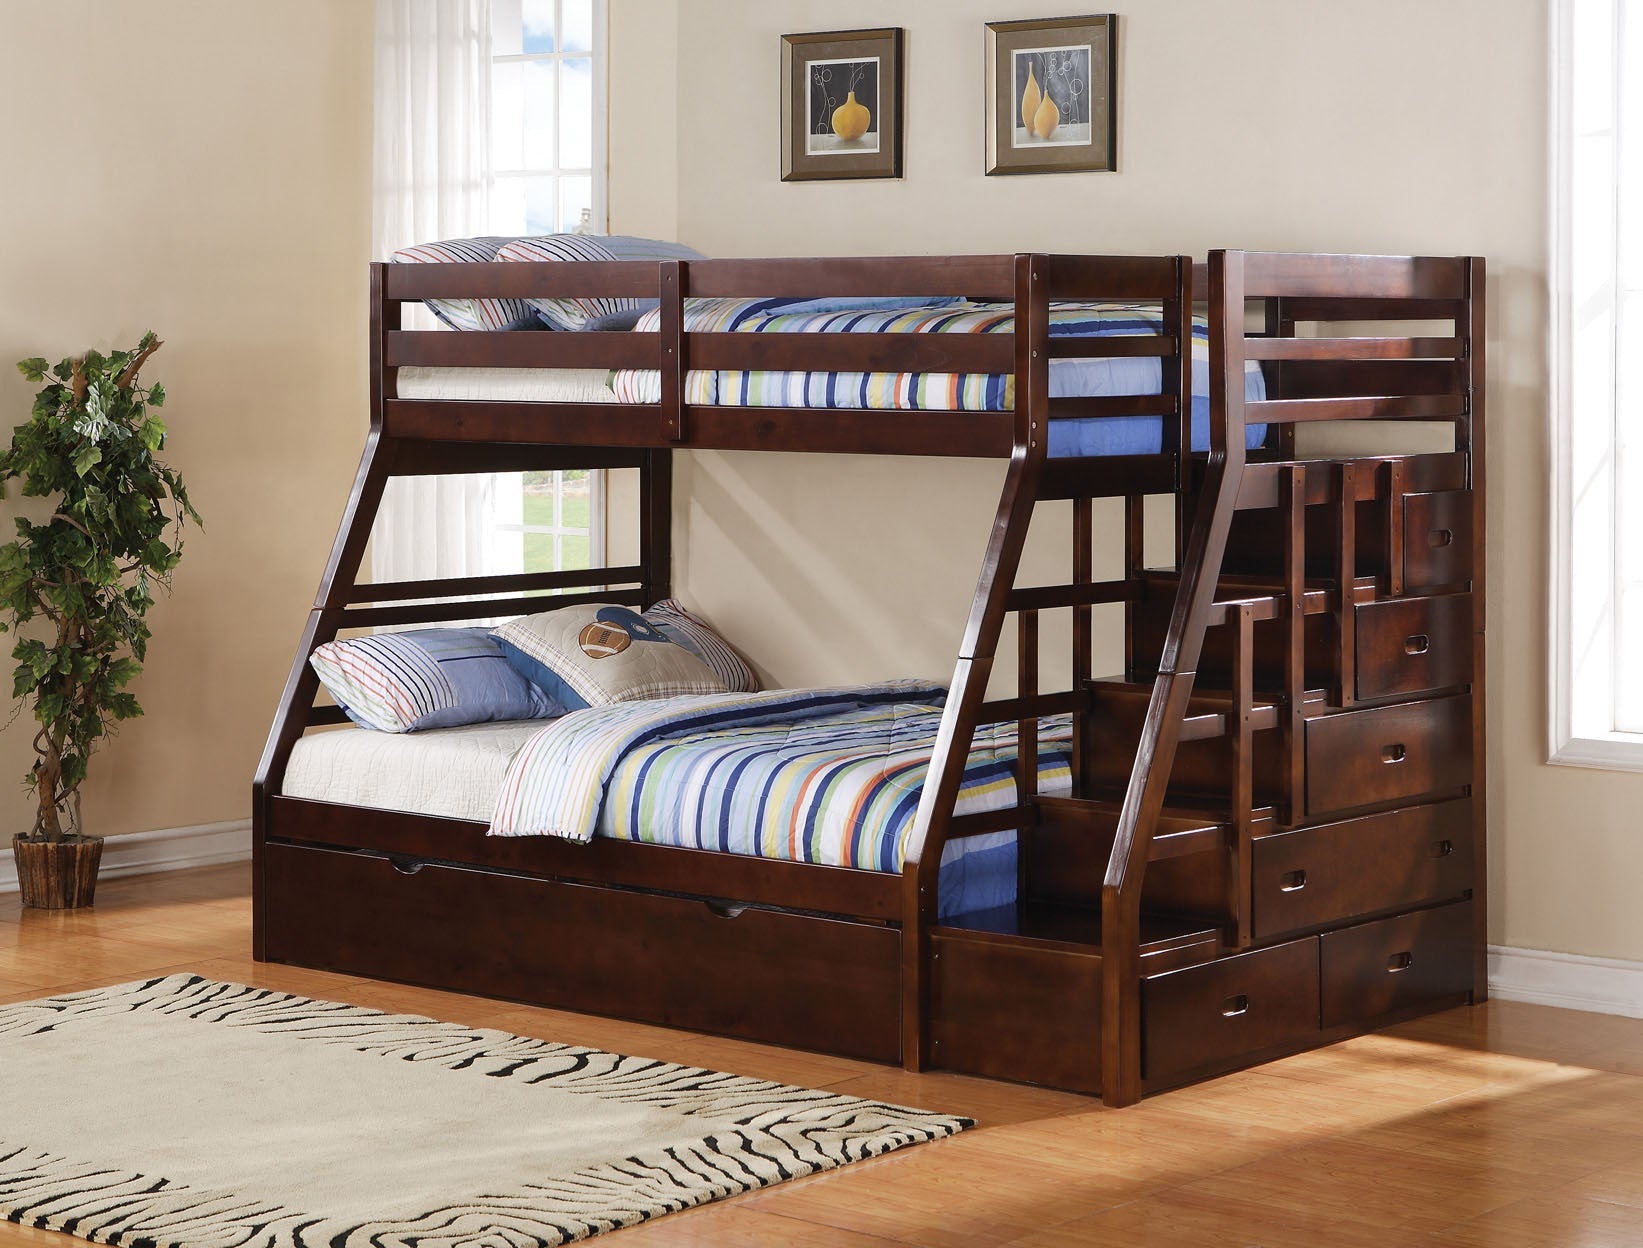 Mari - Single Over Double Bunk Bed With Storage & Double Pull Out Trundle